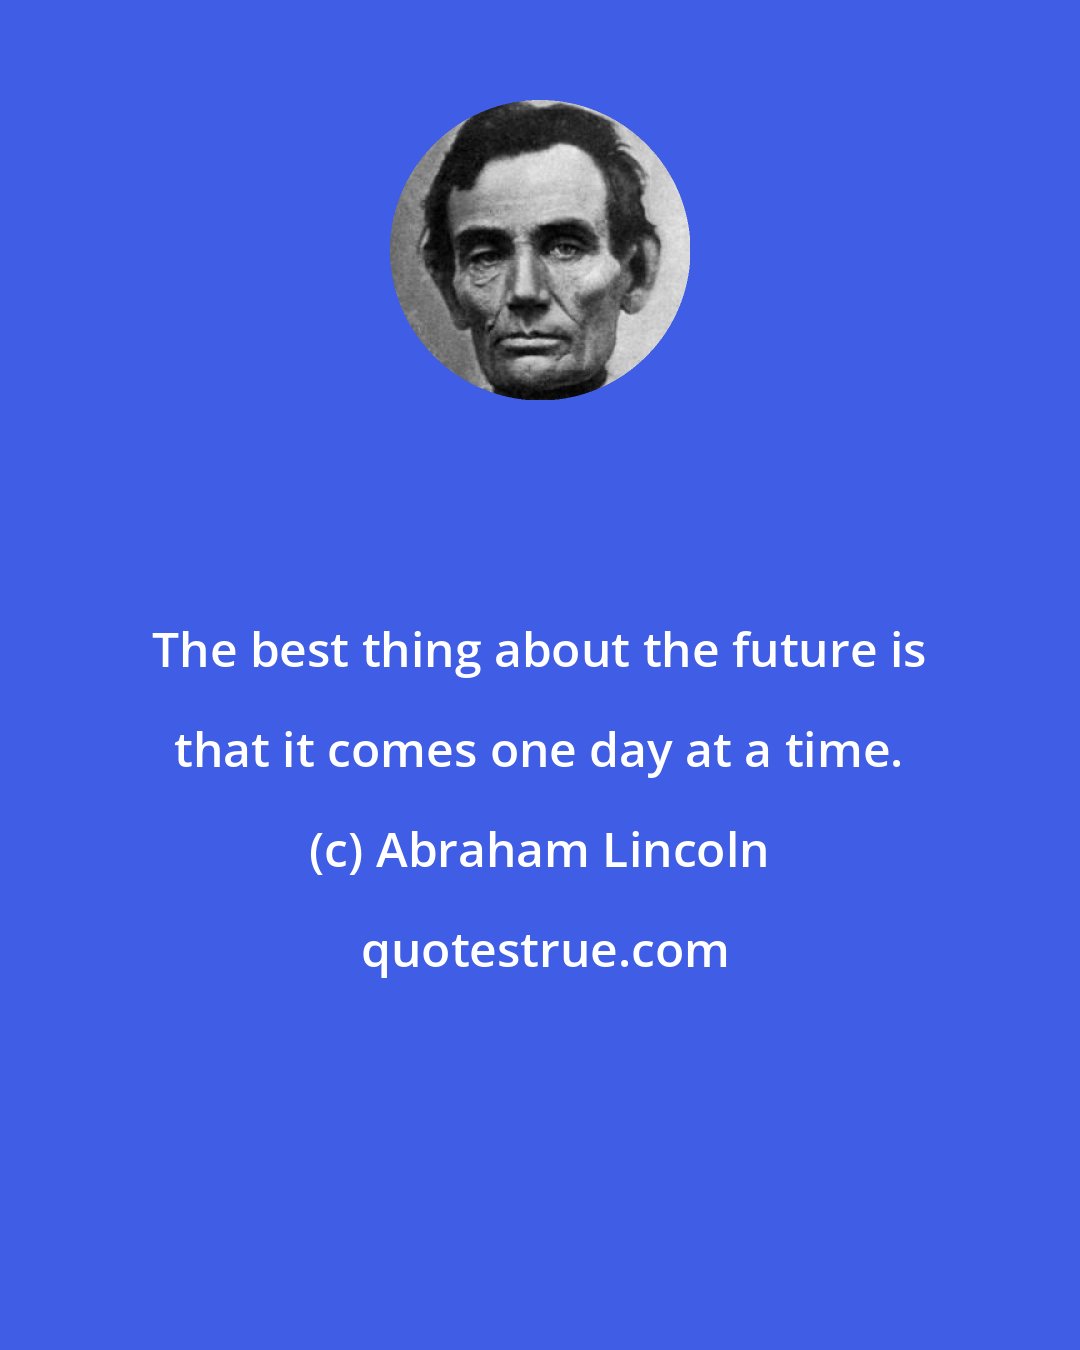 Abraham Lincoln: The best thing about the future is that it comes one day at a time.